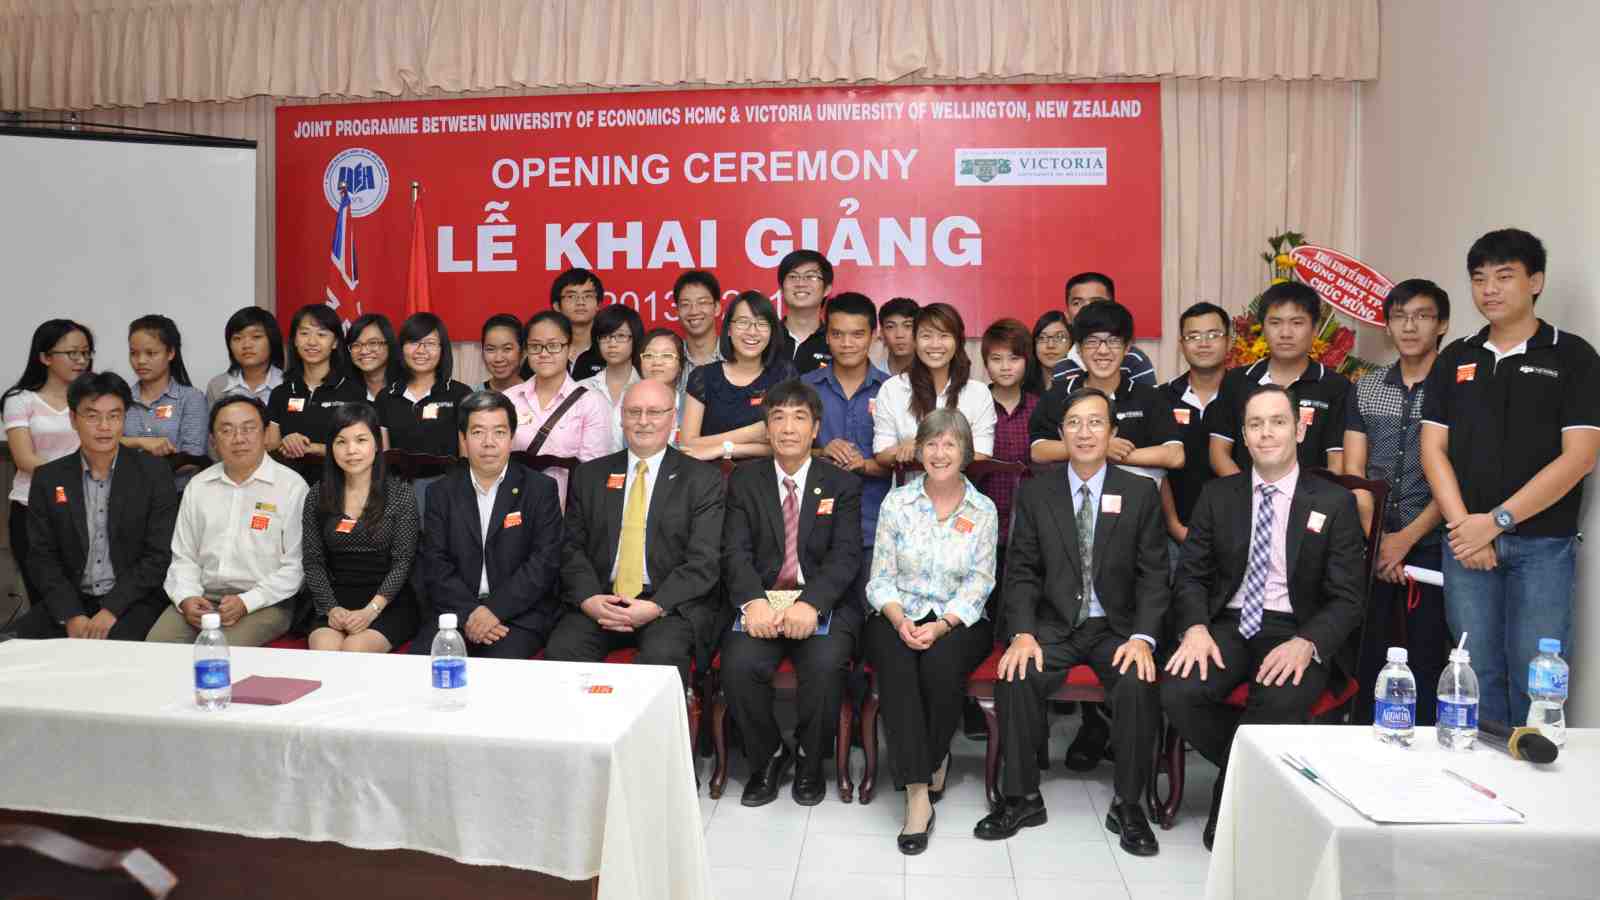 Pro Vice-Chancellor (International) Professor Rob Rabel (front row, fifth from left), staff and students at the 2013 opening ceremony of Victoria University’s joint programme with the University of Economics in Ho Chi Minh City, Vietnam. 